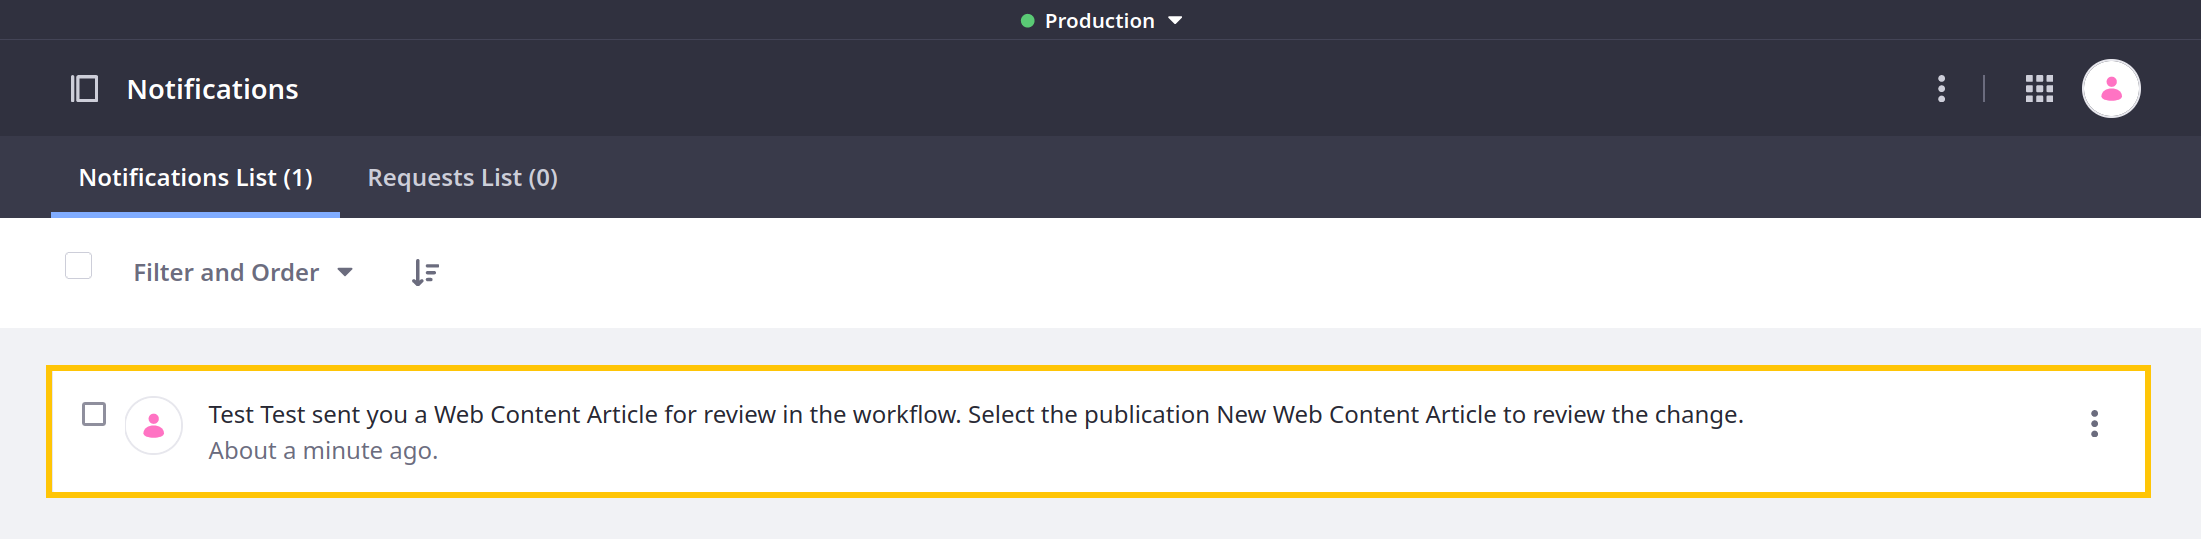 Workflow notifications indicate the environment where changes were made.